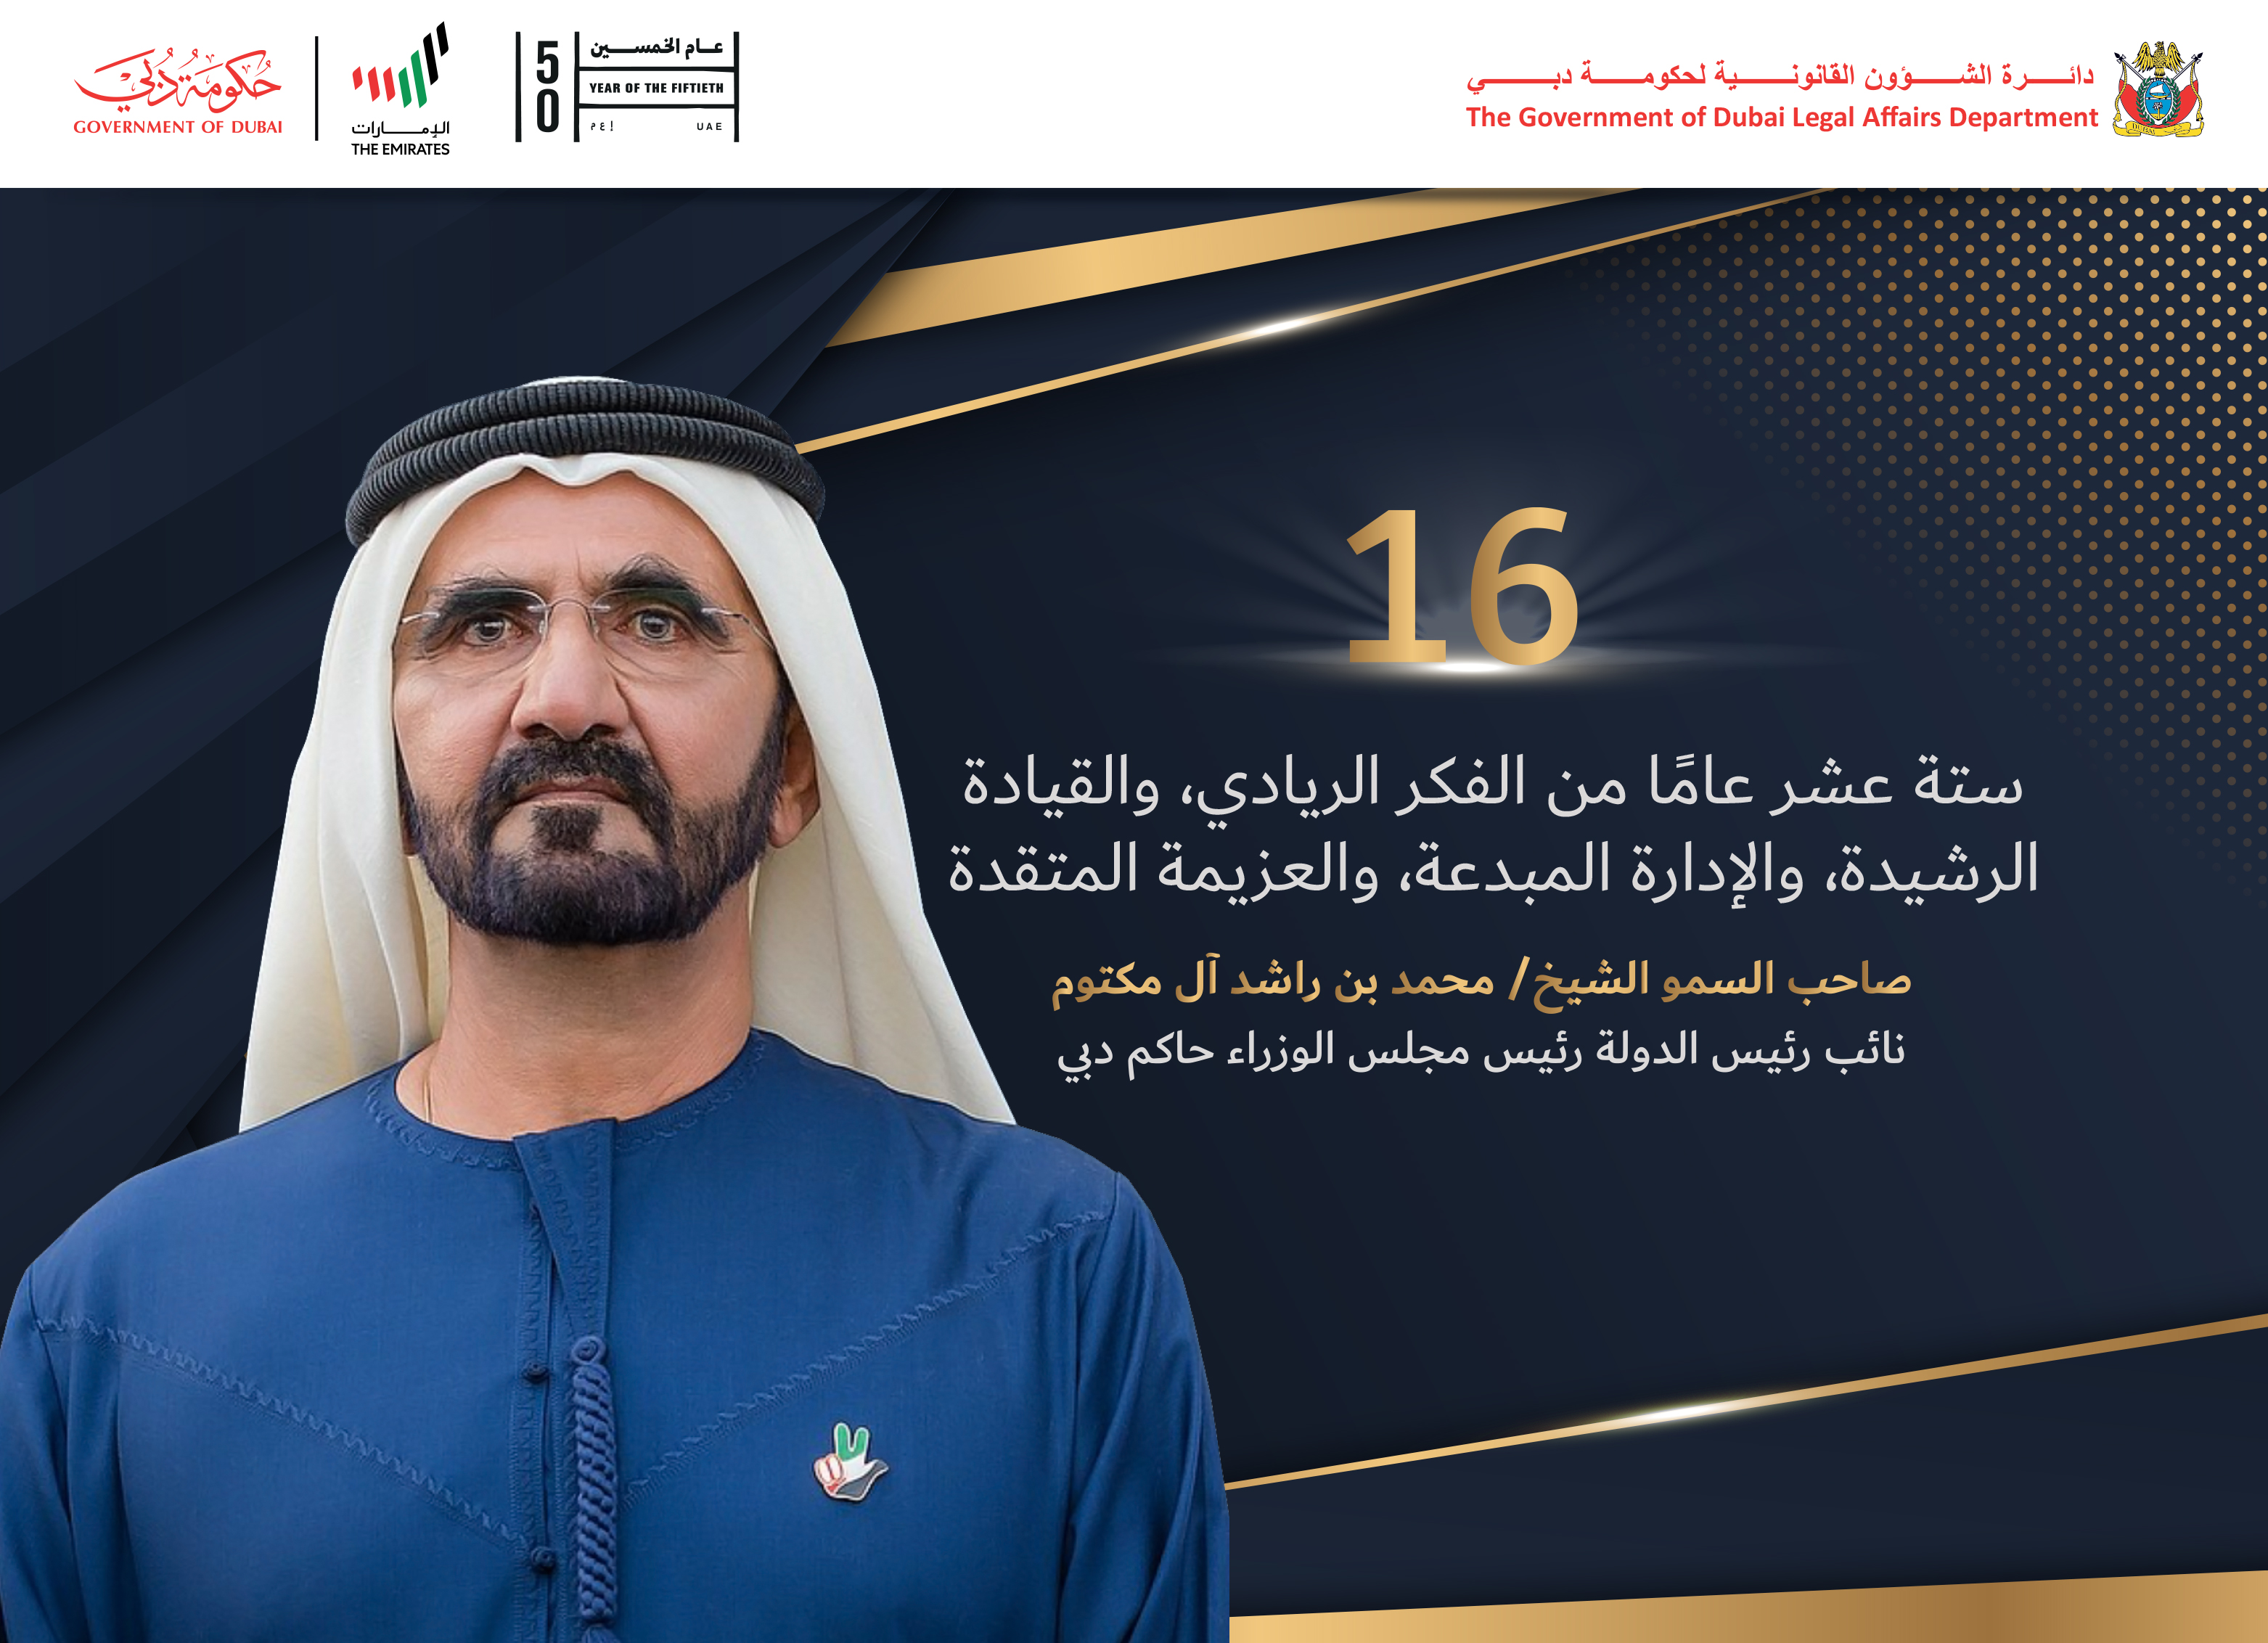 Words of His Excellency the Director General of the Government of Dubai Legal Affairs Department on the occasion of His Highness Sheikh Mohammed bin Rashid Al Maktoum’s Ascension as Ruler of the Emirate